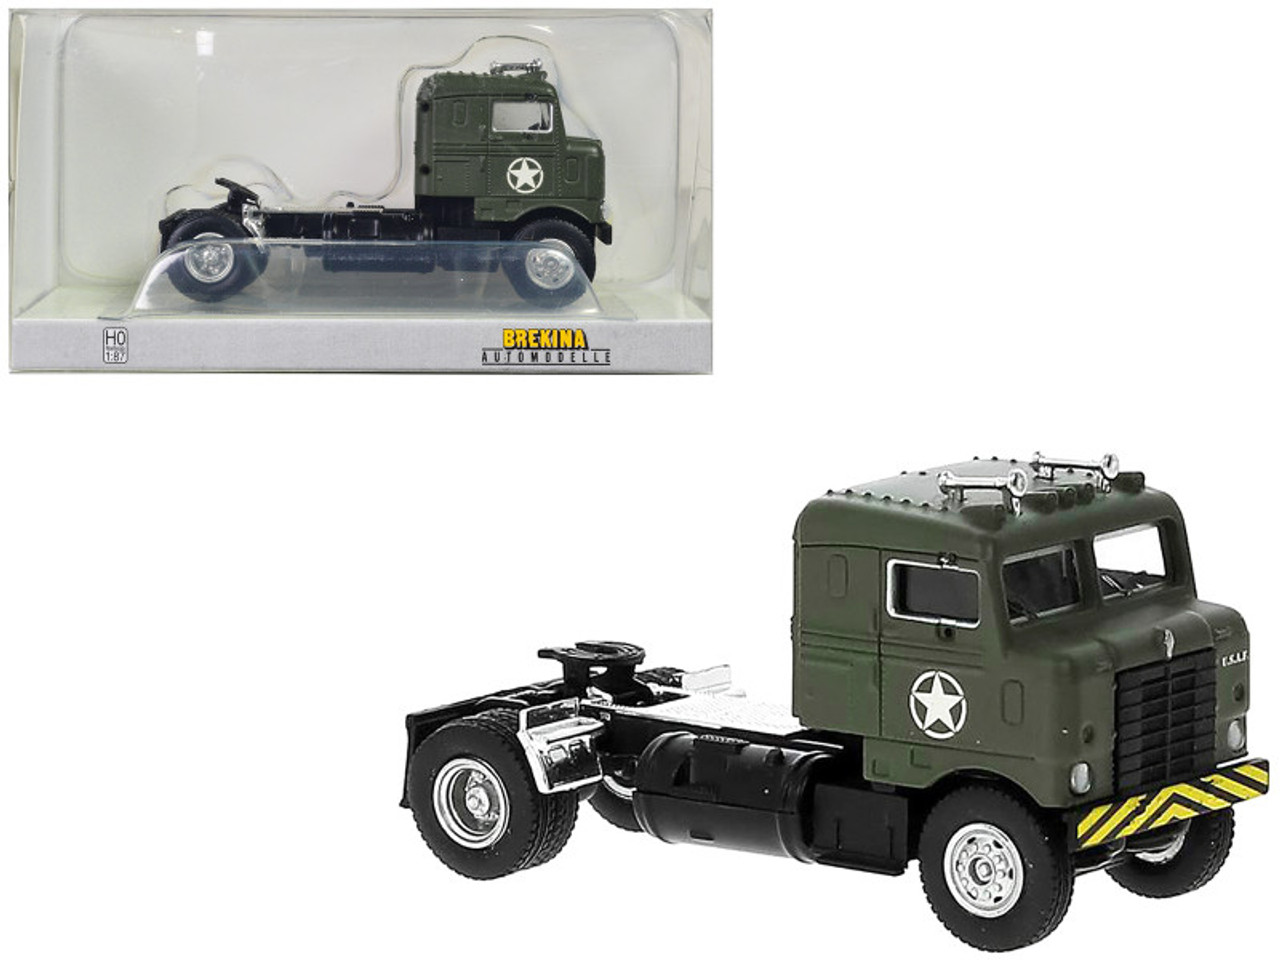 1950 Kenworth Bullnose Truck Tractor Olive Drab "United States Air Force" 1/87 (HO) Scale Model Car by Brekina